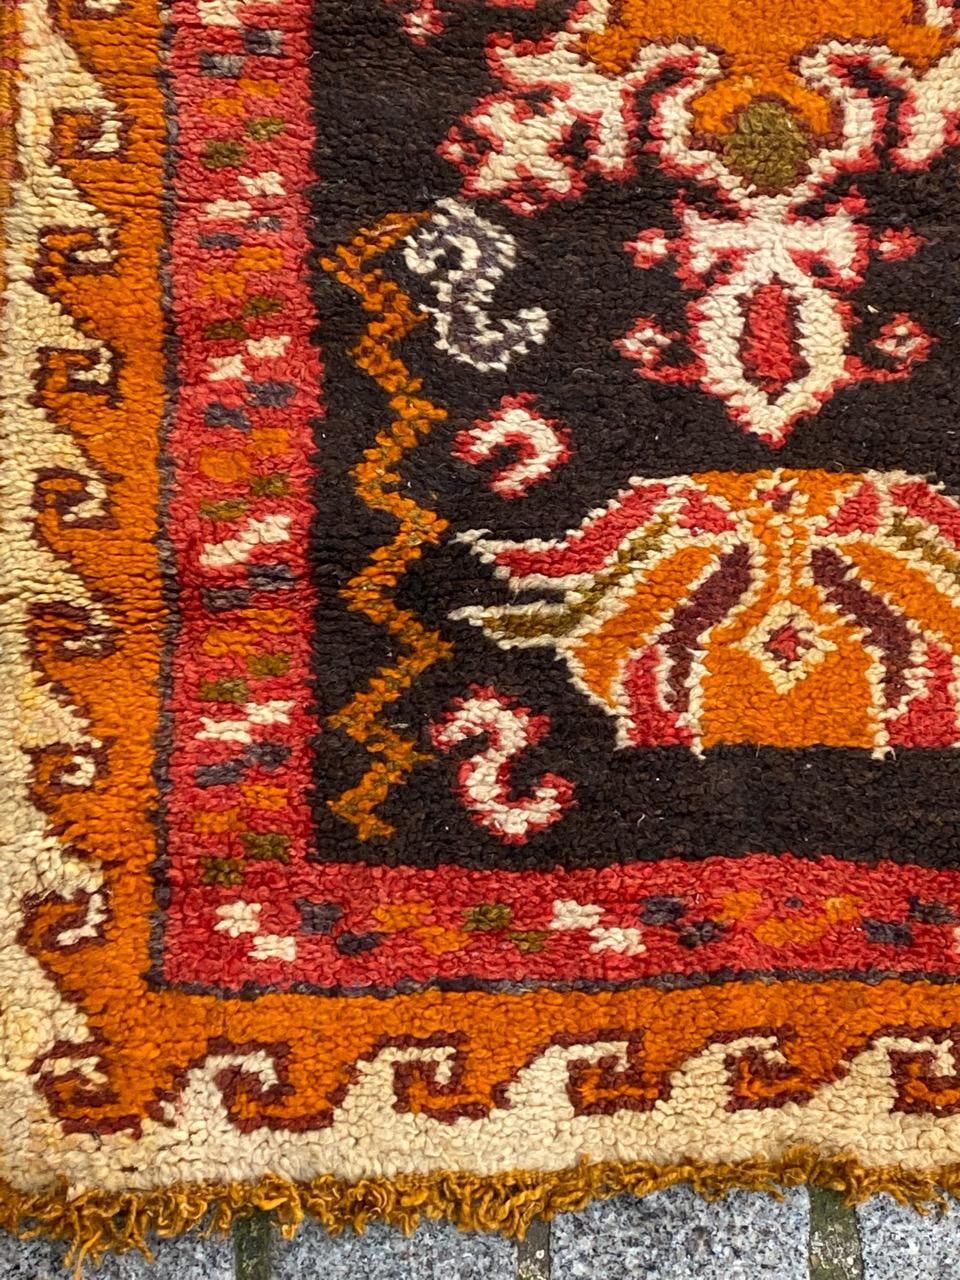 Nice little vintage Moroccan rug with beautiful geometrical design and nice colors, entirely hand knotted with wool velvet on wool foundation.

✨✨✨
